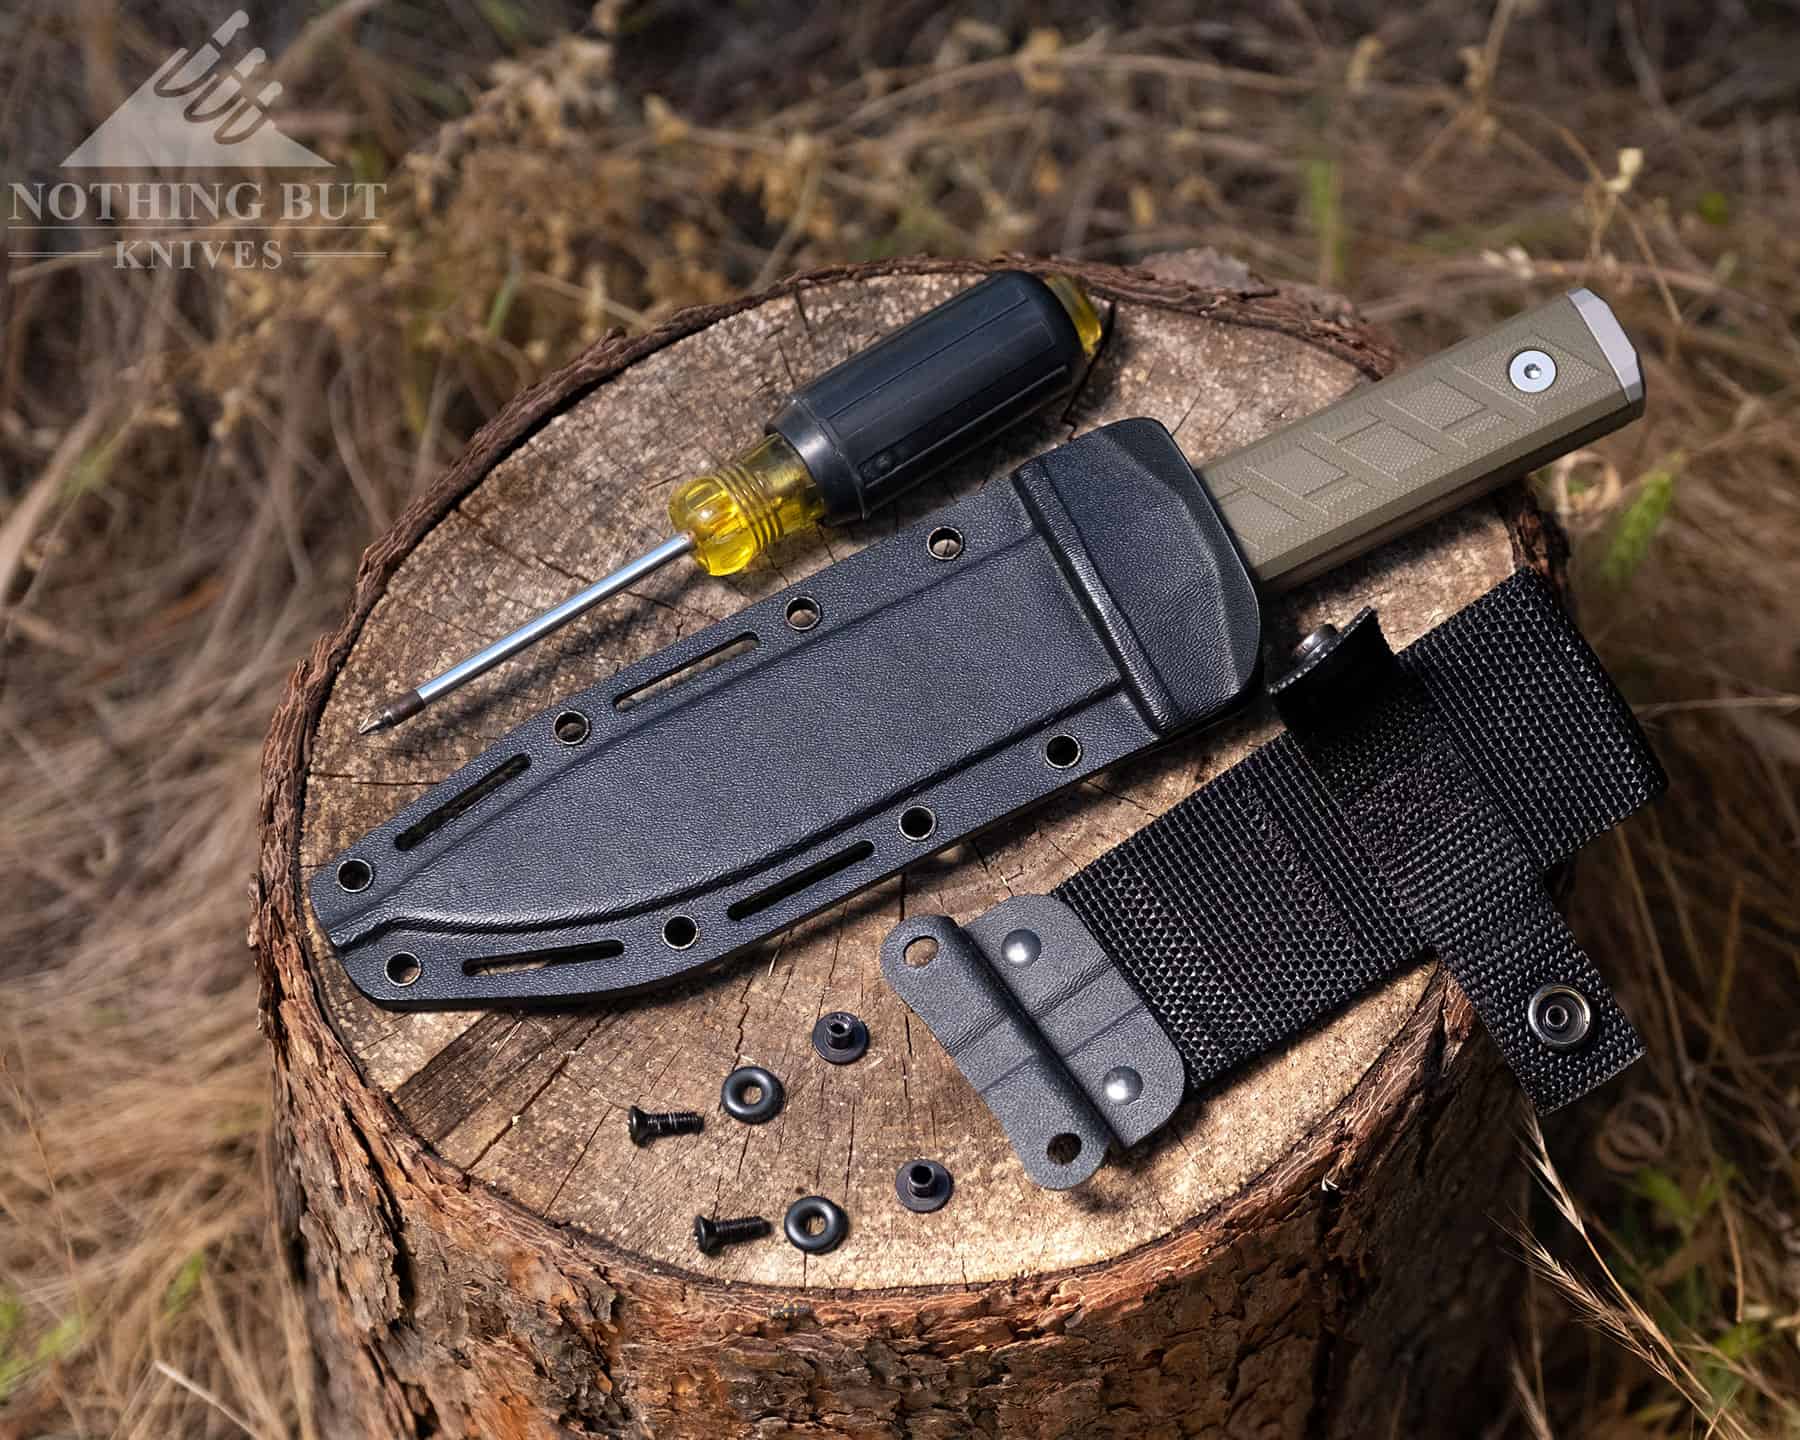 The 006 sheath is adjustable, but the process can be difficult. 